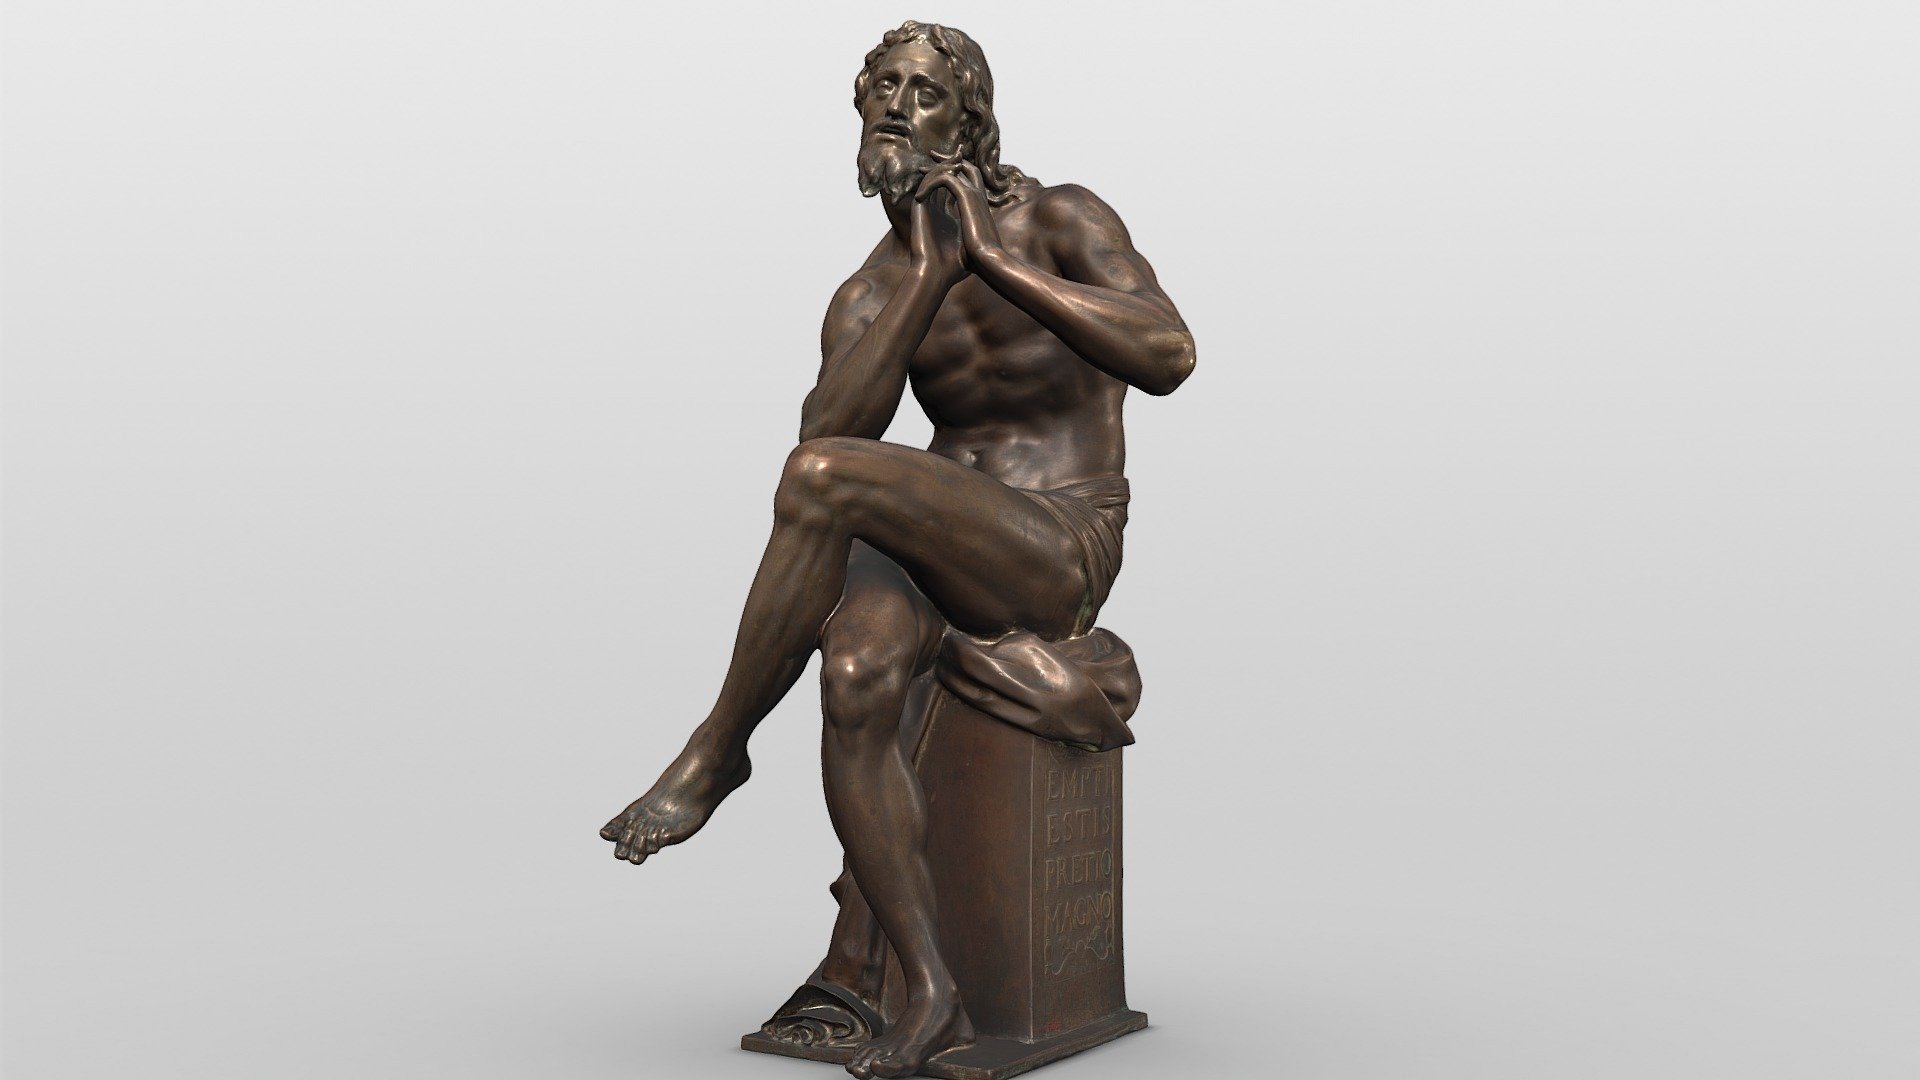 Adrian de Fries (The Hague 1556–1626 Prague), Christ in Distress, 1607, bronze, brown natural patina, with olive-brown artificial patina, acquired in 1607 by Prince Karl I von Liechtenstein

LIECHTENSTEIN, The Princely Collections, Vaduz–Vienna, Inv. SK 515

Model by Harald Wraunek

First published on the occasion of the exhibition CAST FOR ETERNITY. The Bronzes of the Princes of Liechtenstein held at Liechtenstein Garden Palace, Vienna from 1.3.2023 to 31.3.2023

© LIECHTENSTEIN, The Princely Collections, Vaduz–Vienna - Christ in Distress - 3D model by LIECHTENSTEIN. The Princely Collections (@liechtensteincollections) 3d model